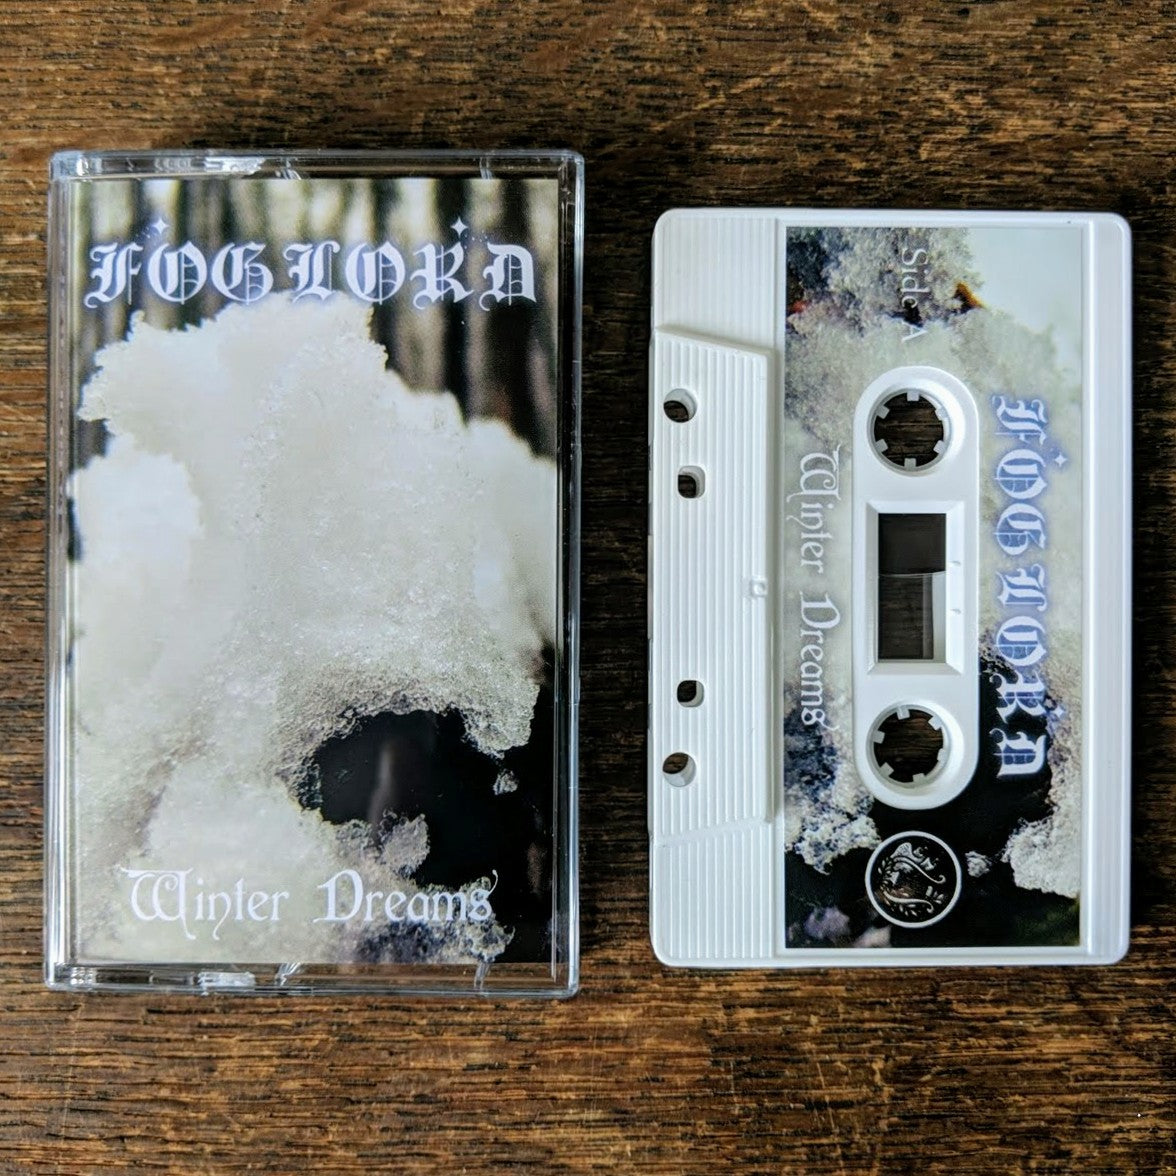 [SOLD OUT] FOGLORD "Winter Dreams" Cassette Tape w/ Deluxe Slipcase